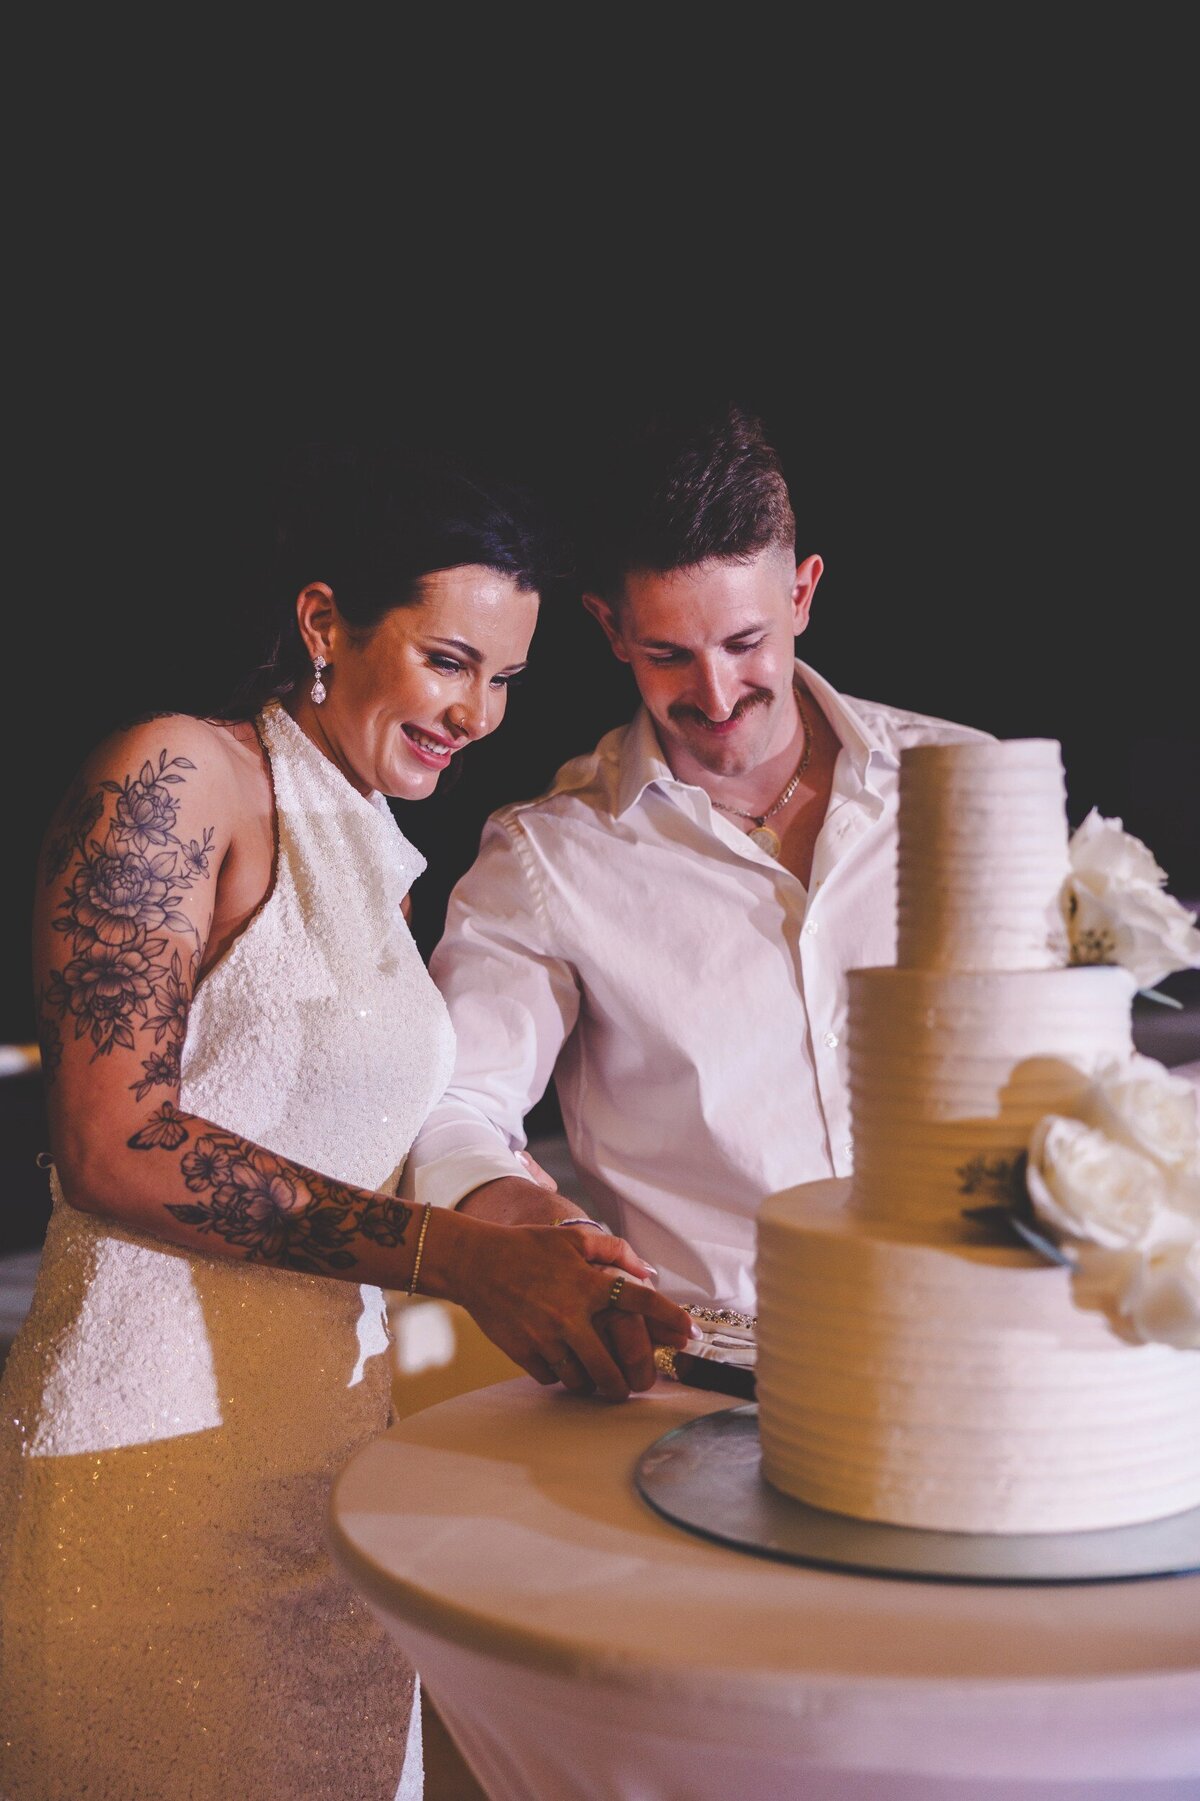 Bride and groom cut cake at wedding in Cancun